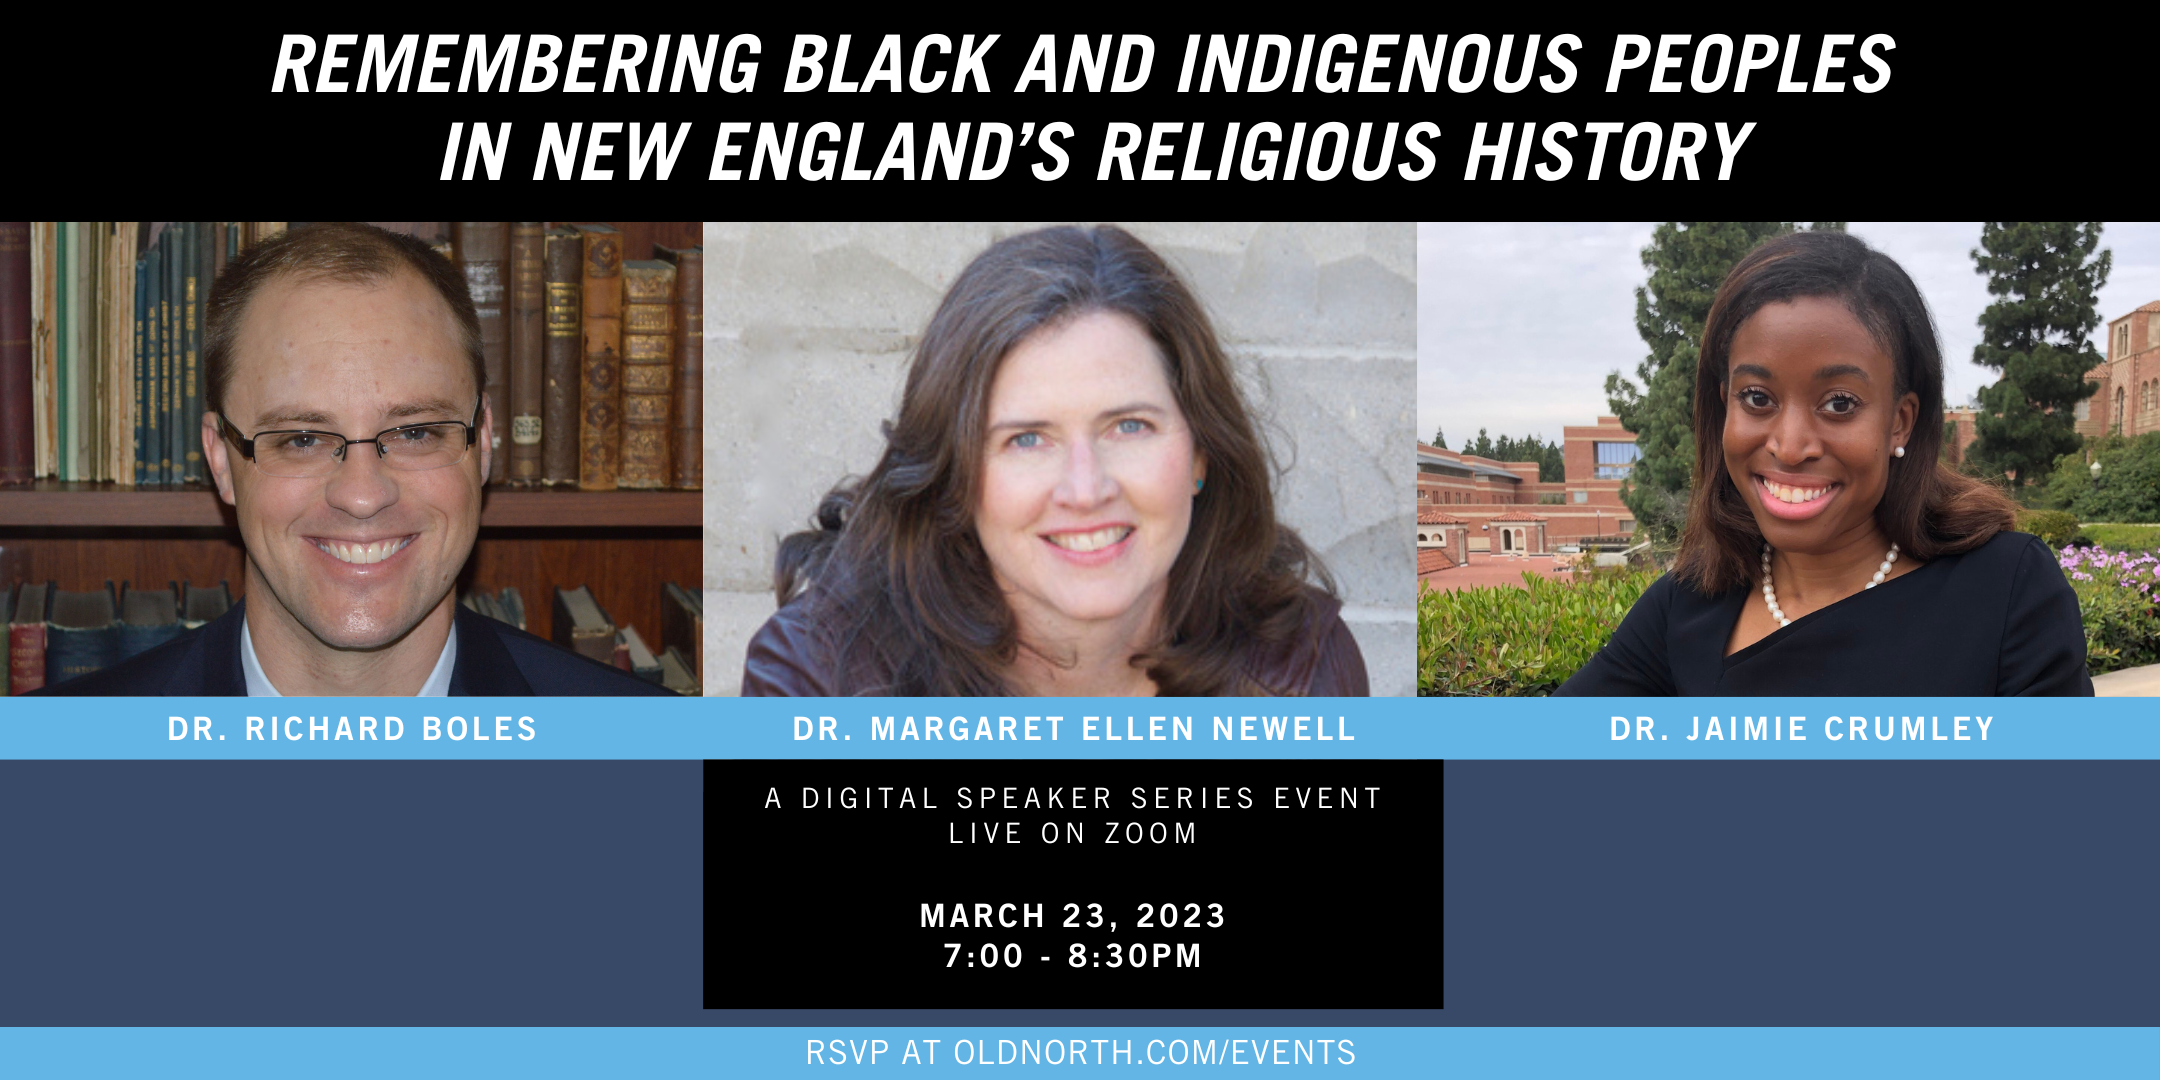 Remembering Black and Indigenous Peoples in New England’s Religious History